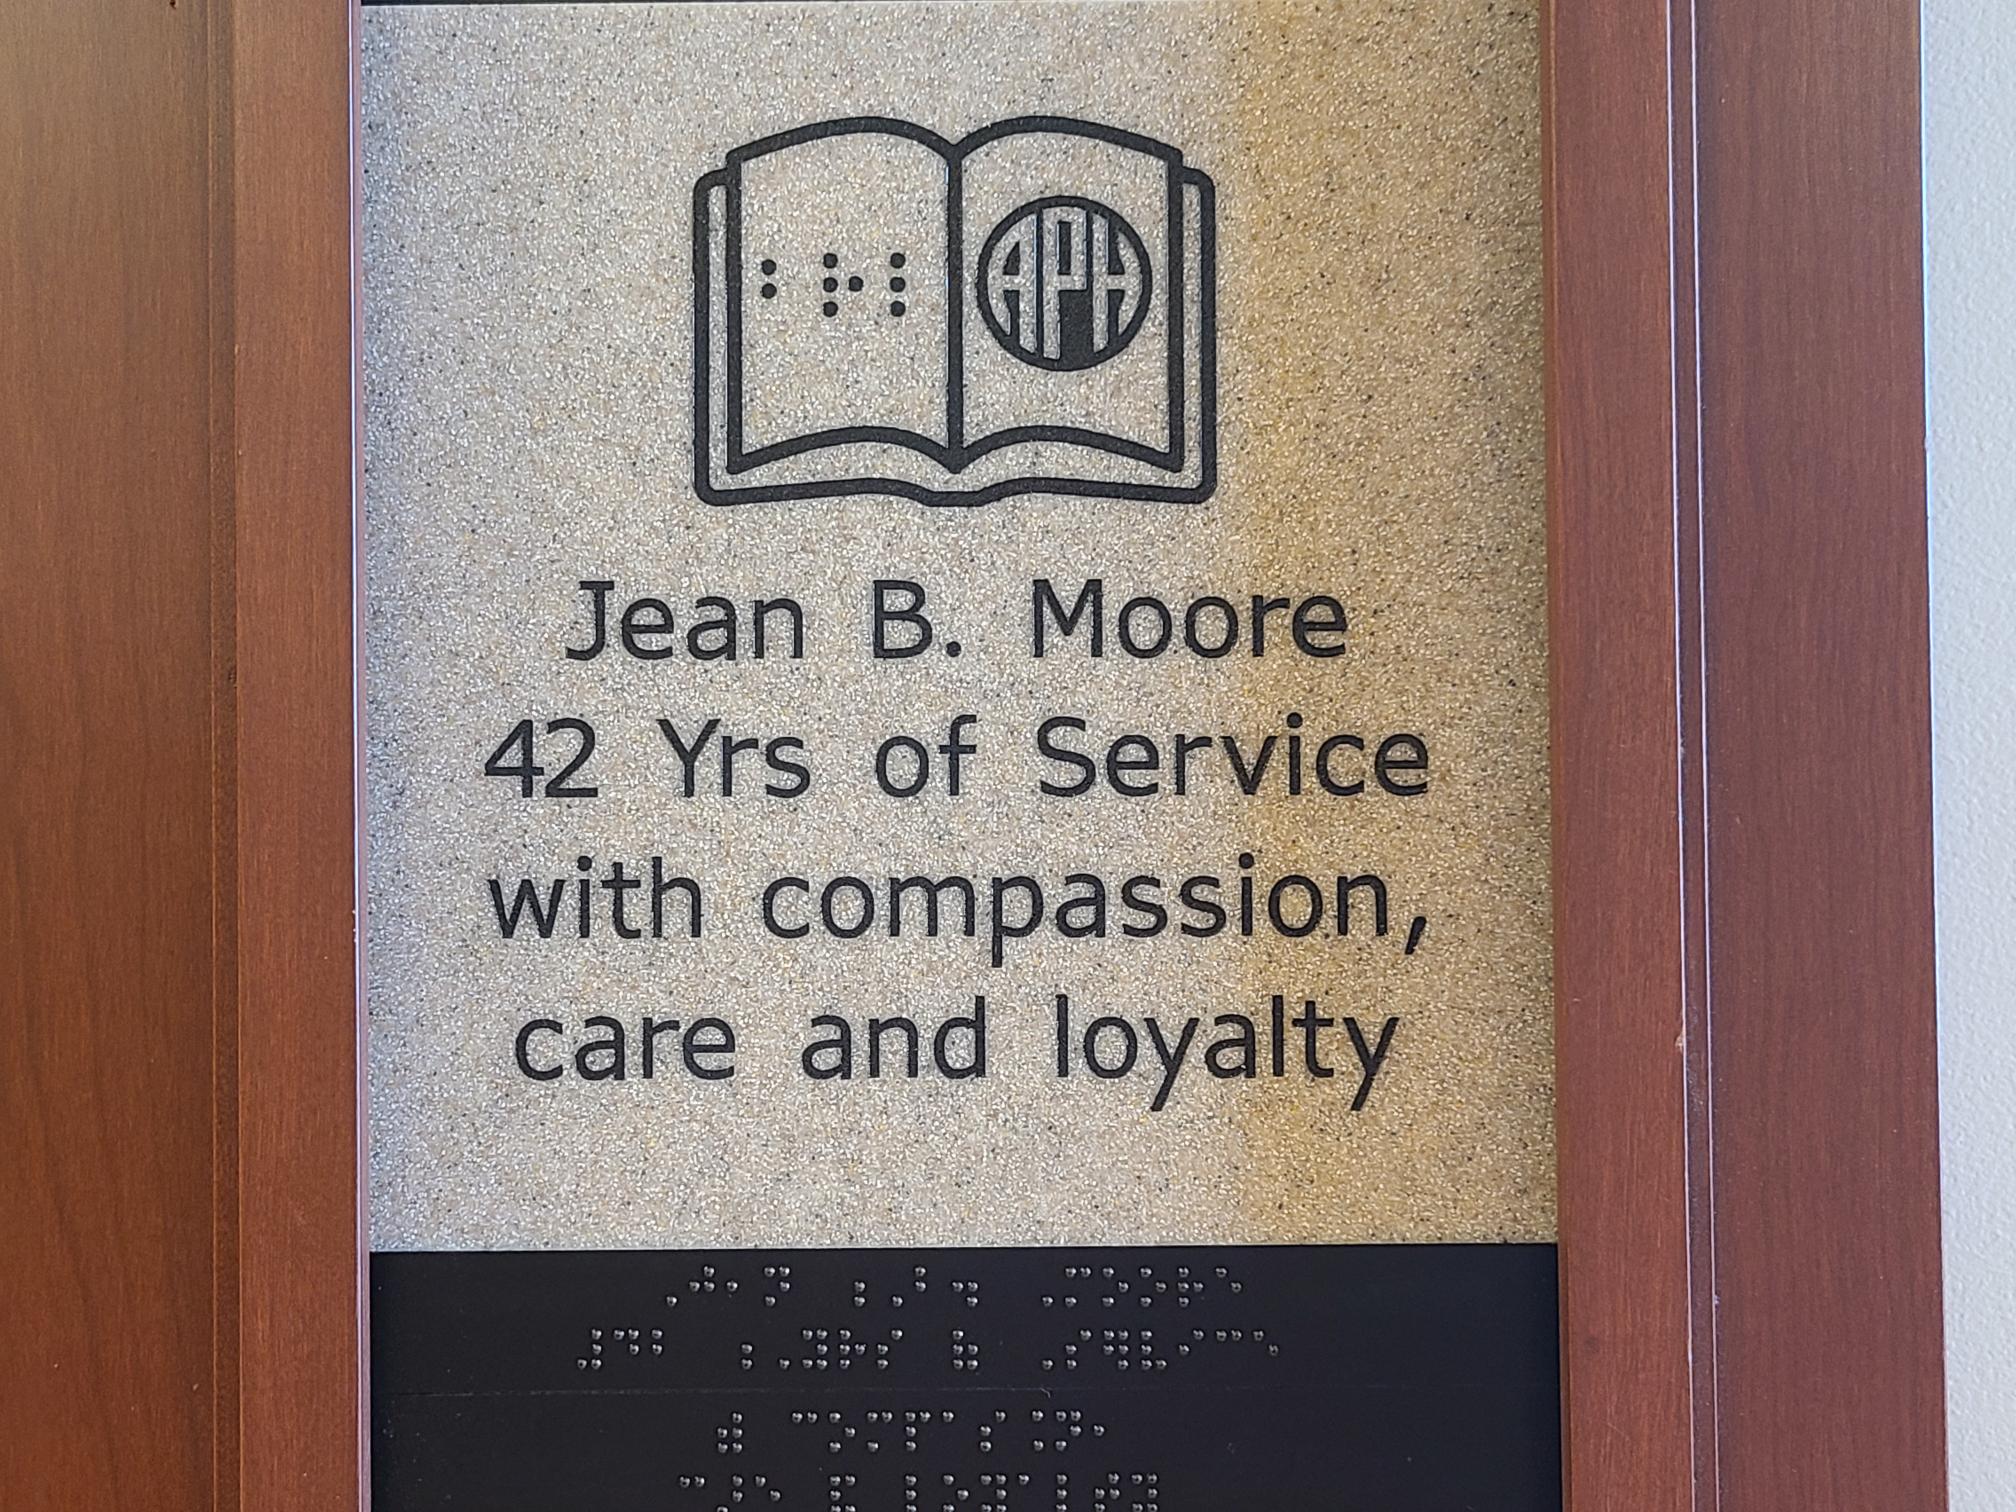 Jean B. Moore, 42 Yrs of Service with compassion, care and loyalty